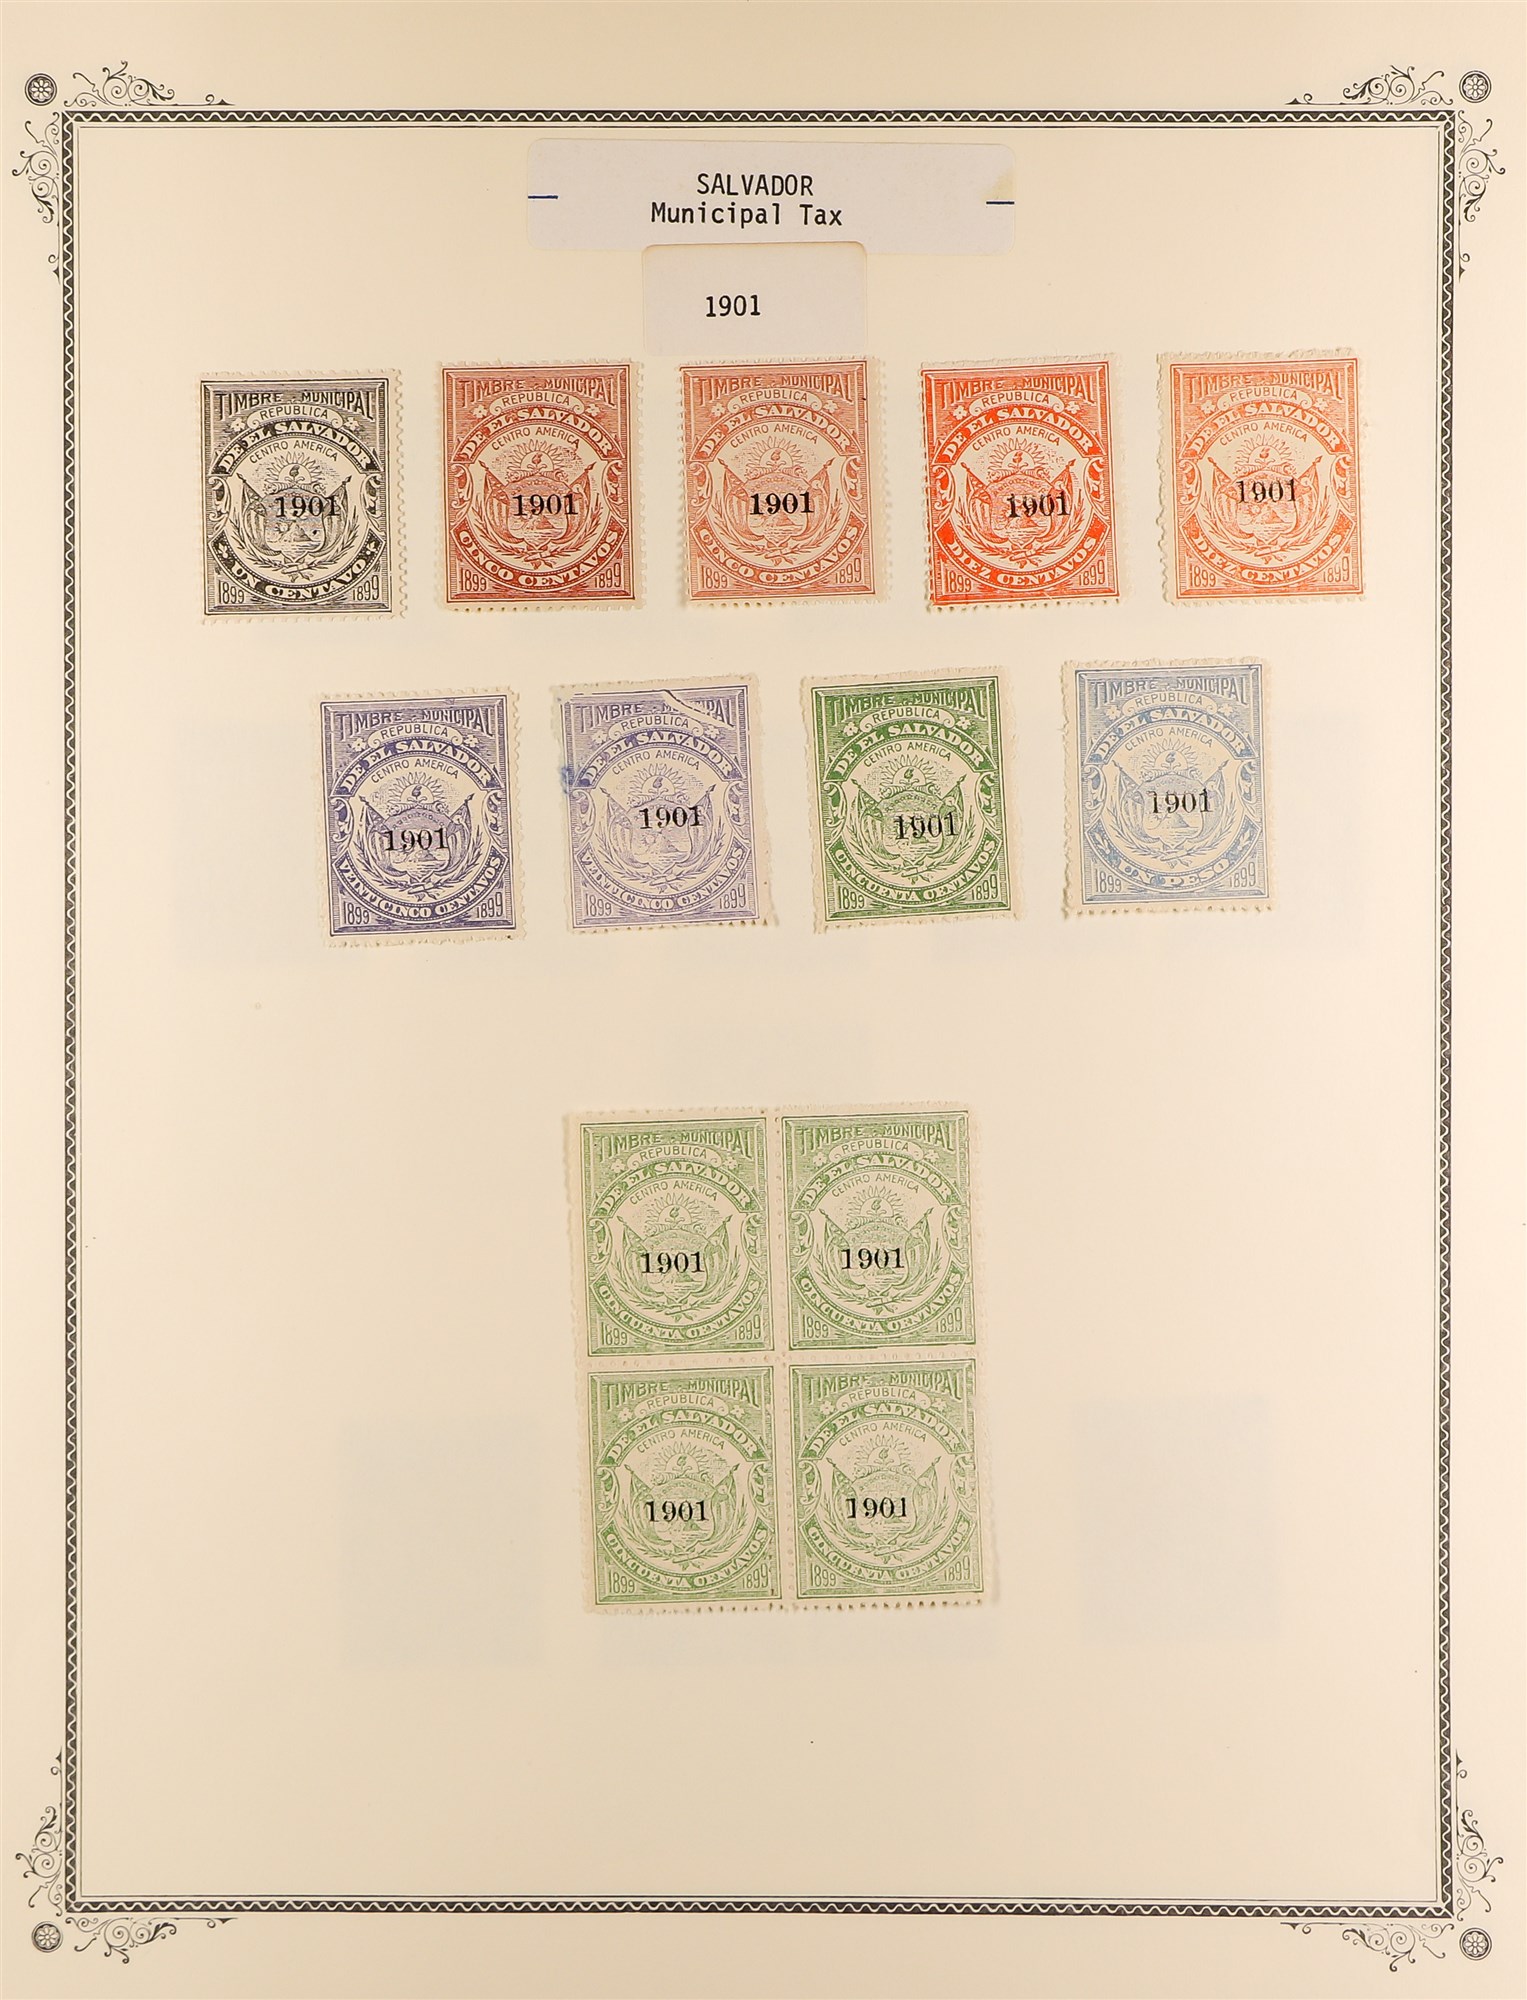 EL SALVADOR REVENUE STAMPS 1883 - 1925 mint & used collection of over 400 revenue stamps, on album - Image 17 of 27